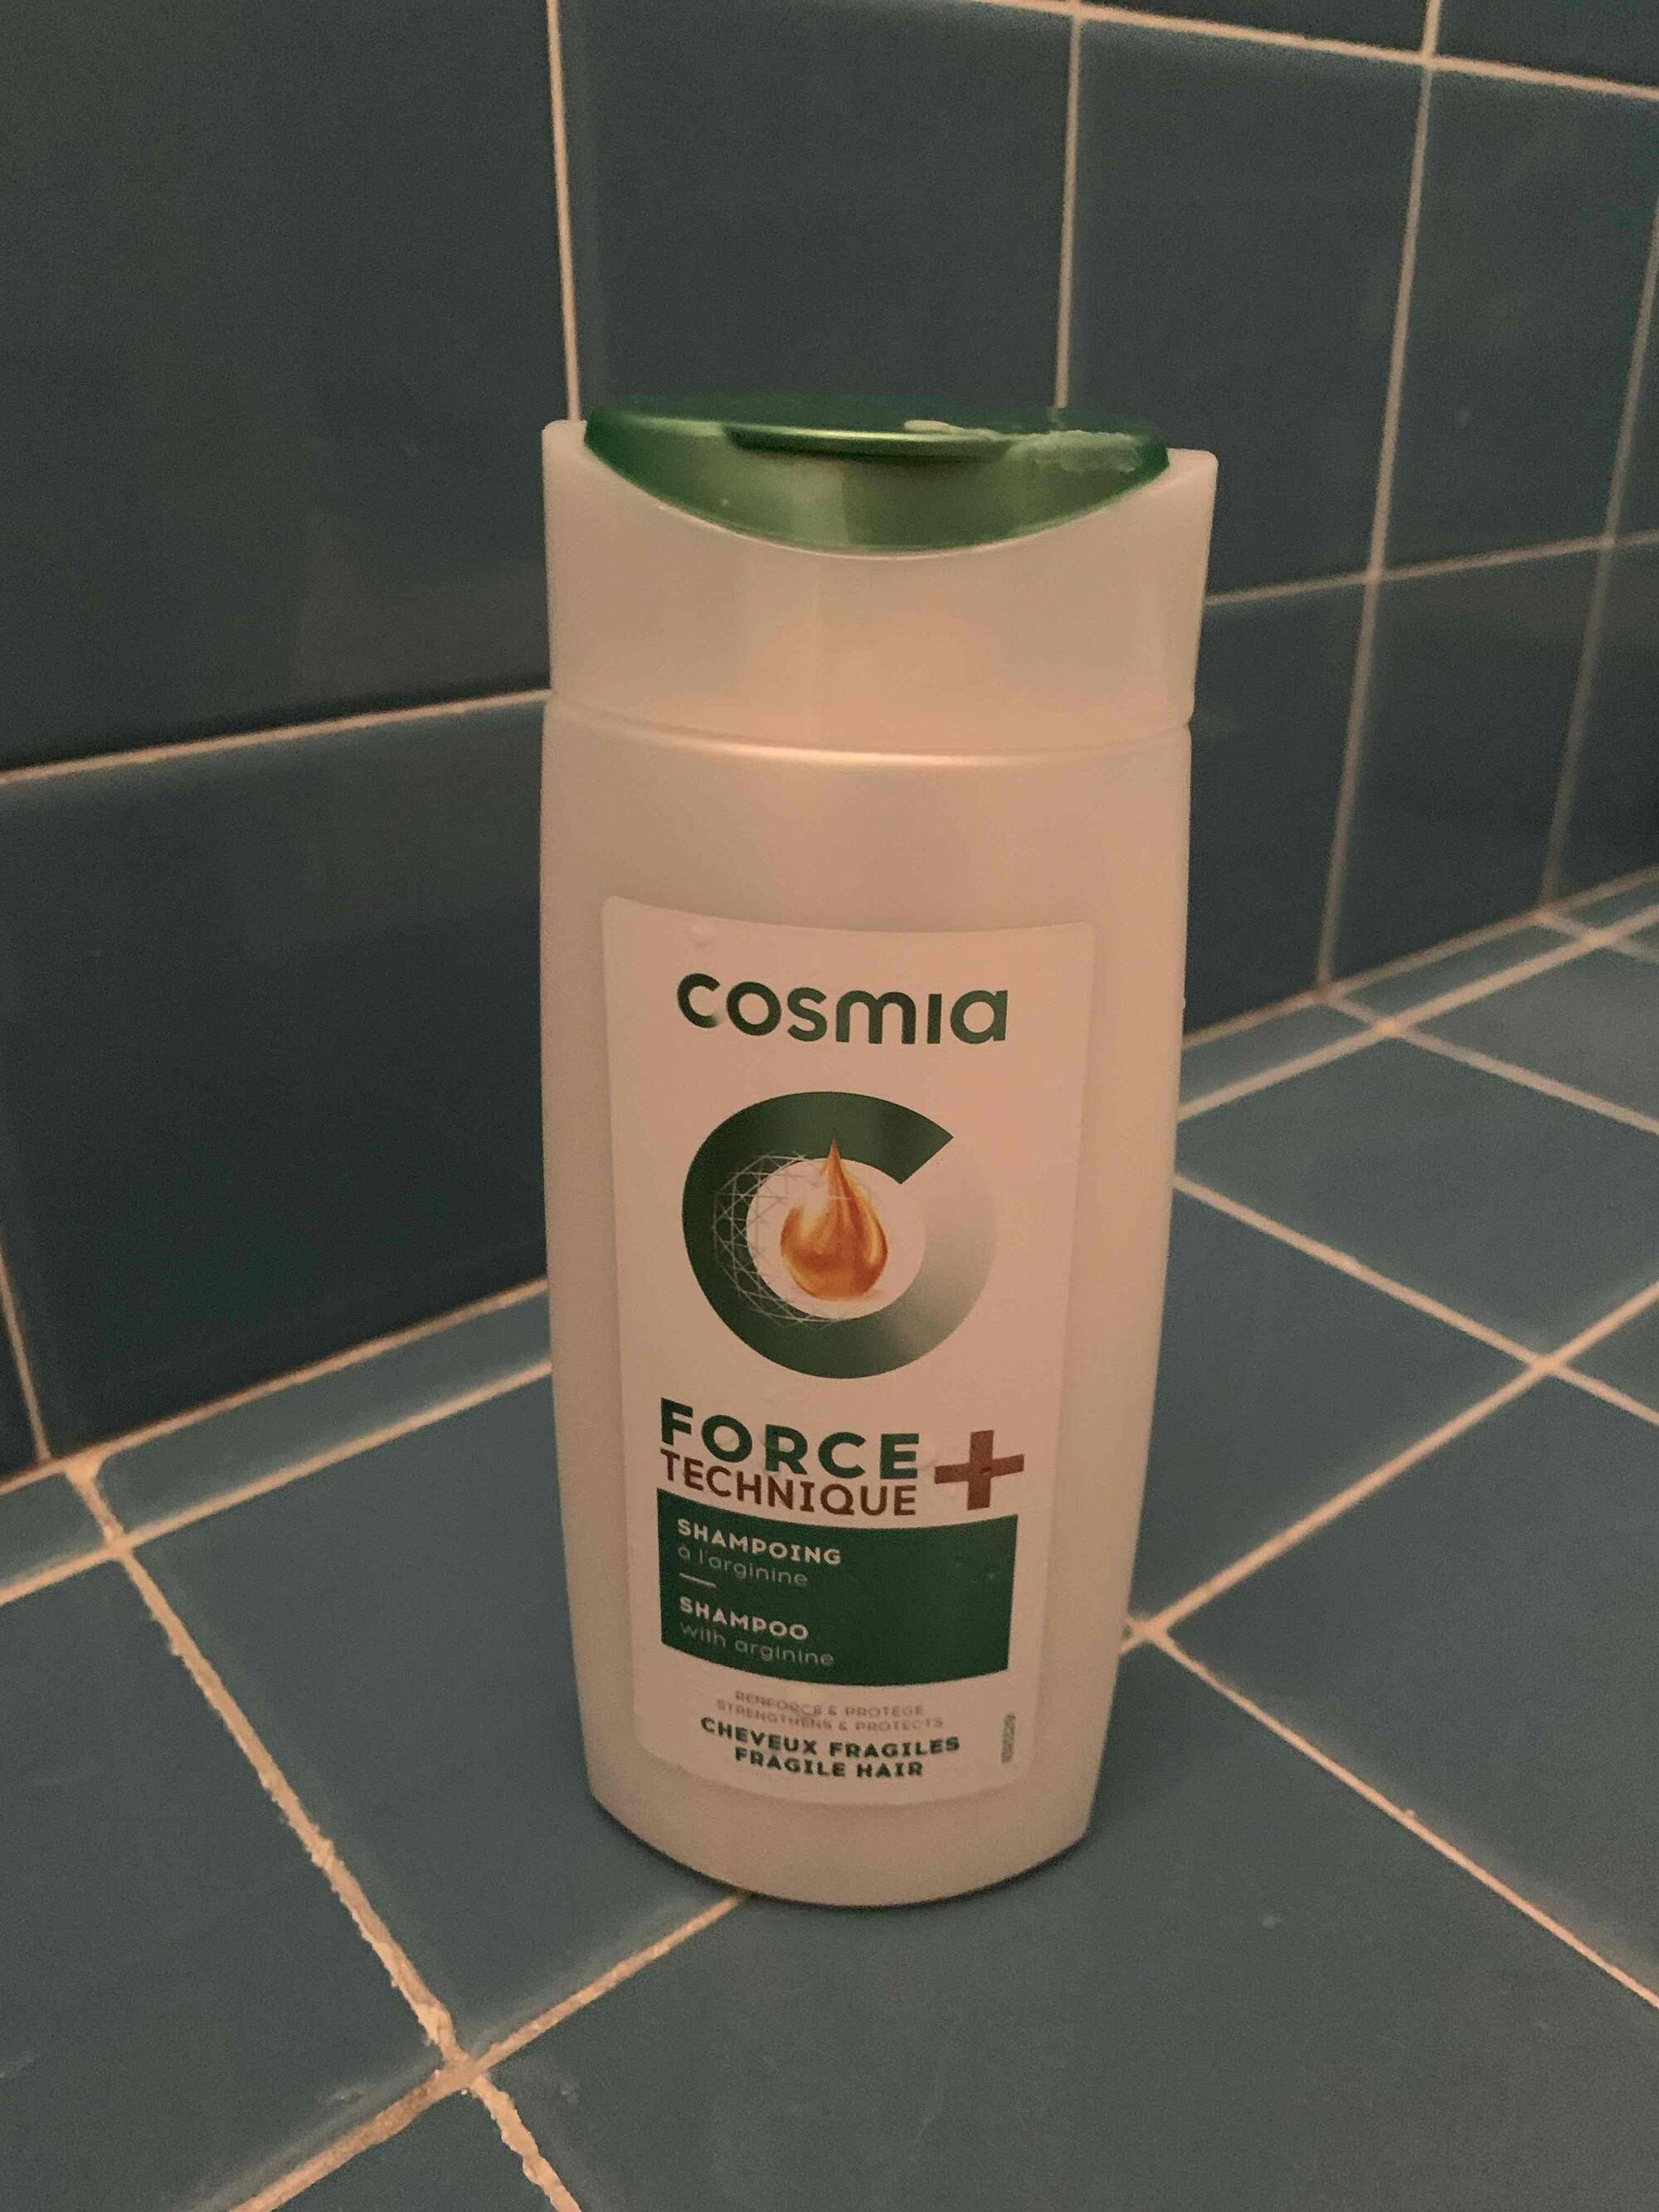 COSMIA - Force technique + - Shampoing